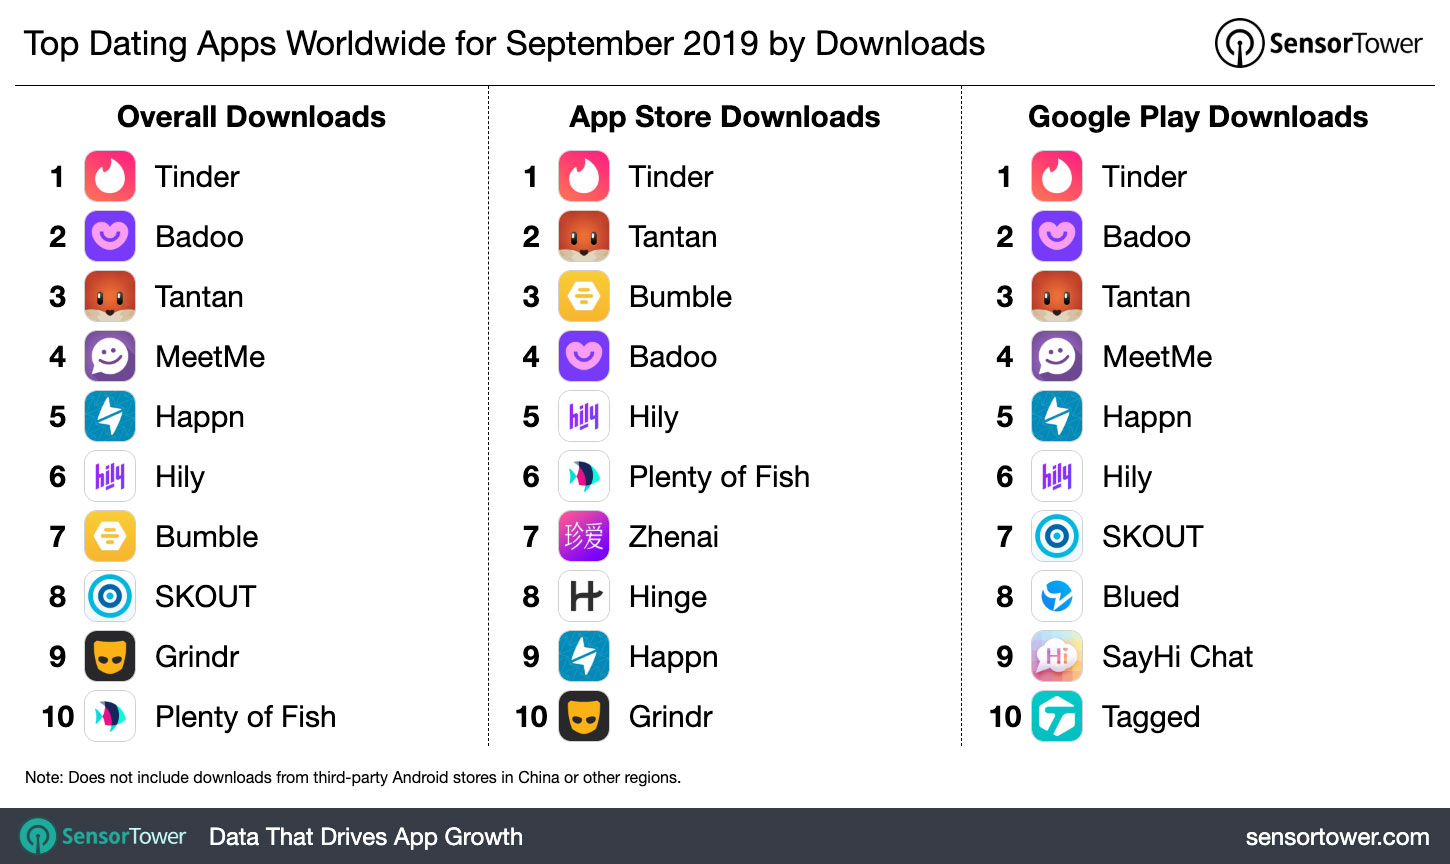 Top Dating Apps Worldwide for September by